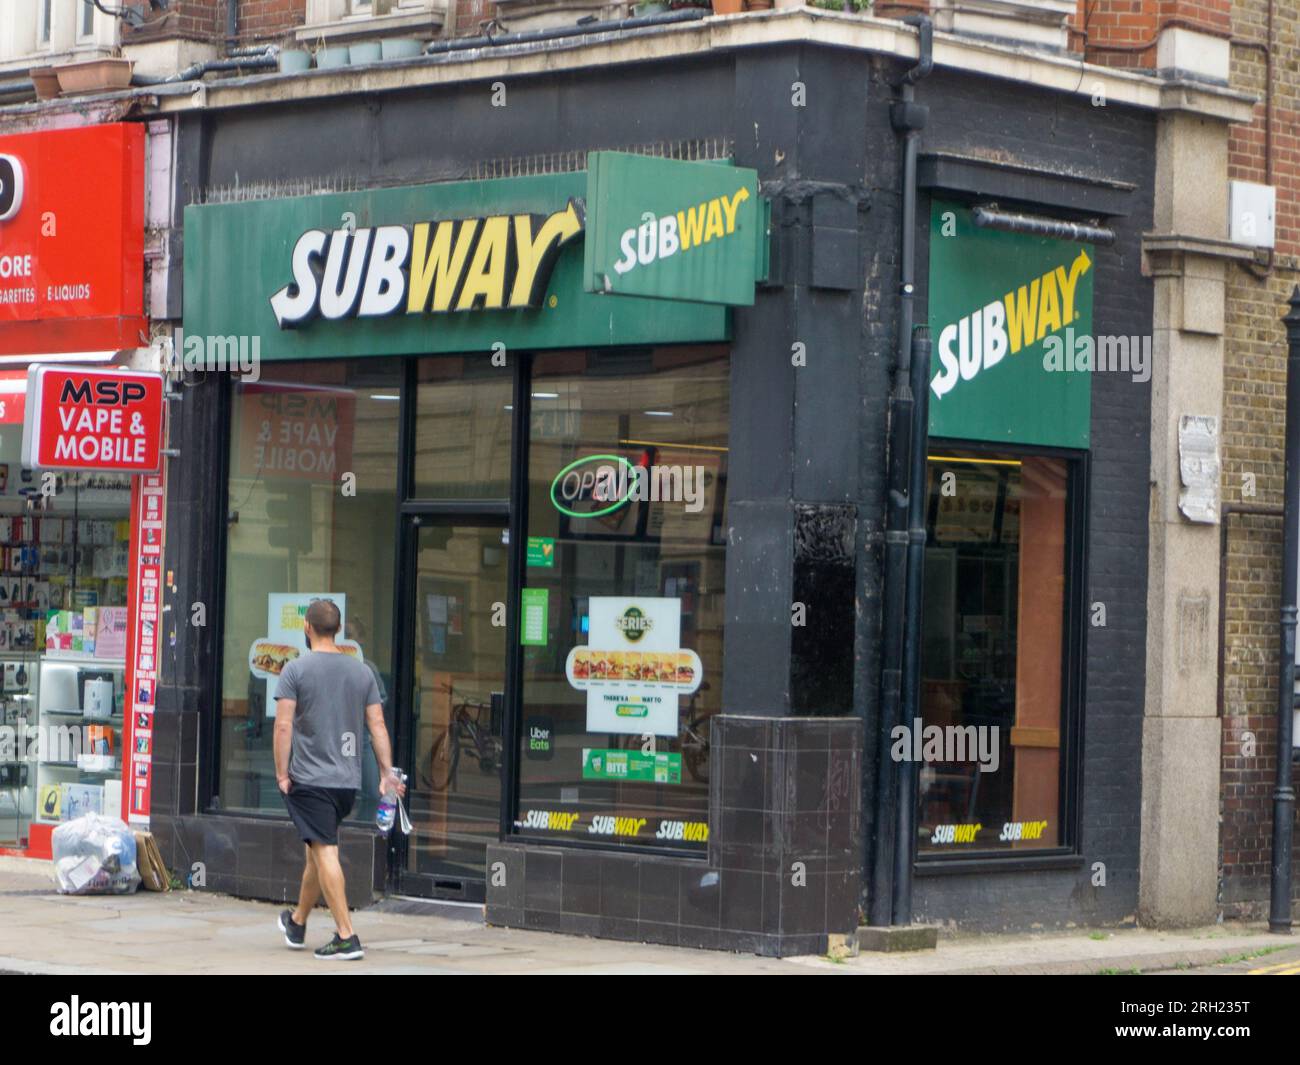 Subway takeaway outlet in Hammersmith, London, UK Stock Photo